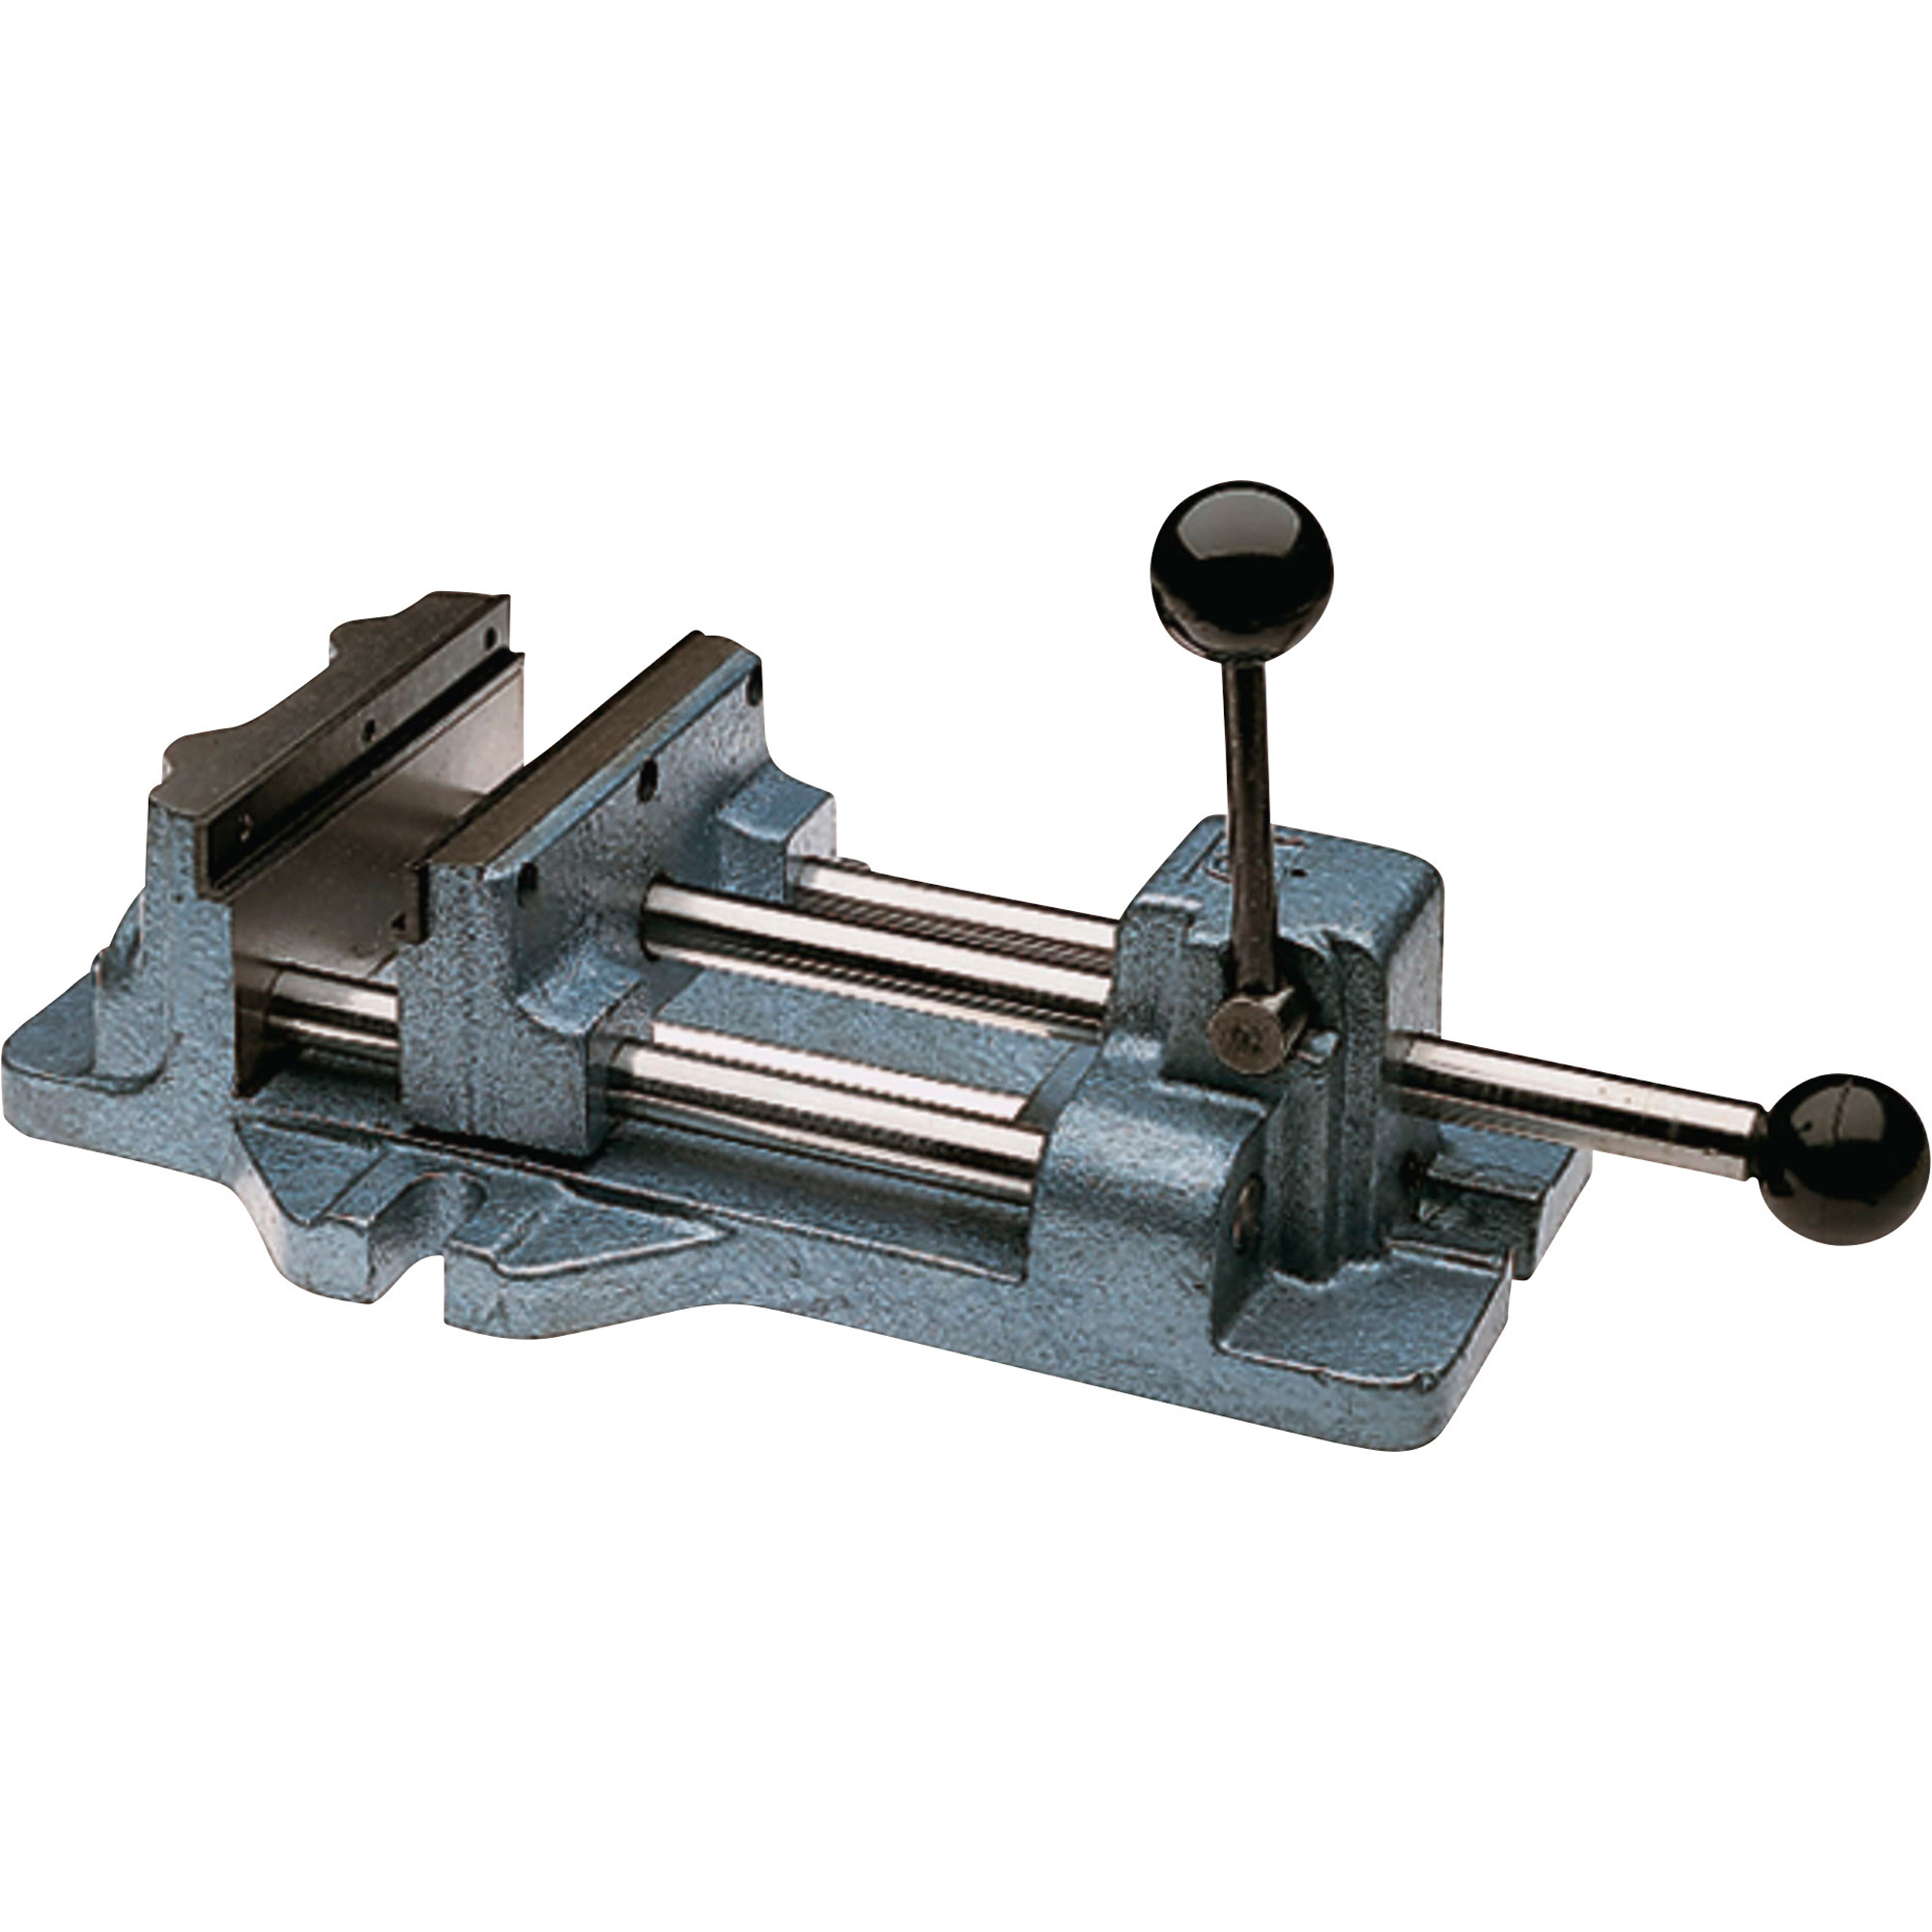 Wilton Cam Action Drill Press Vise — 4Inch Jaw Width, Model 1204 -  13401